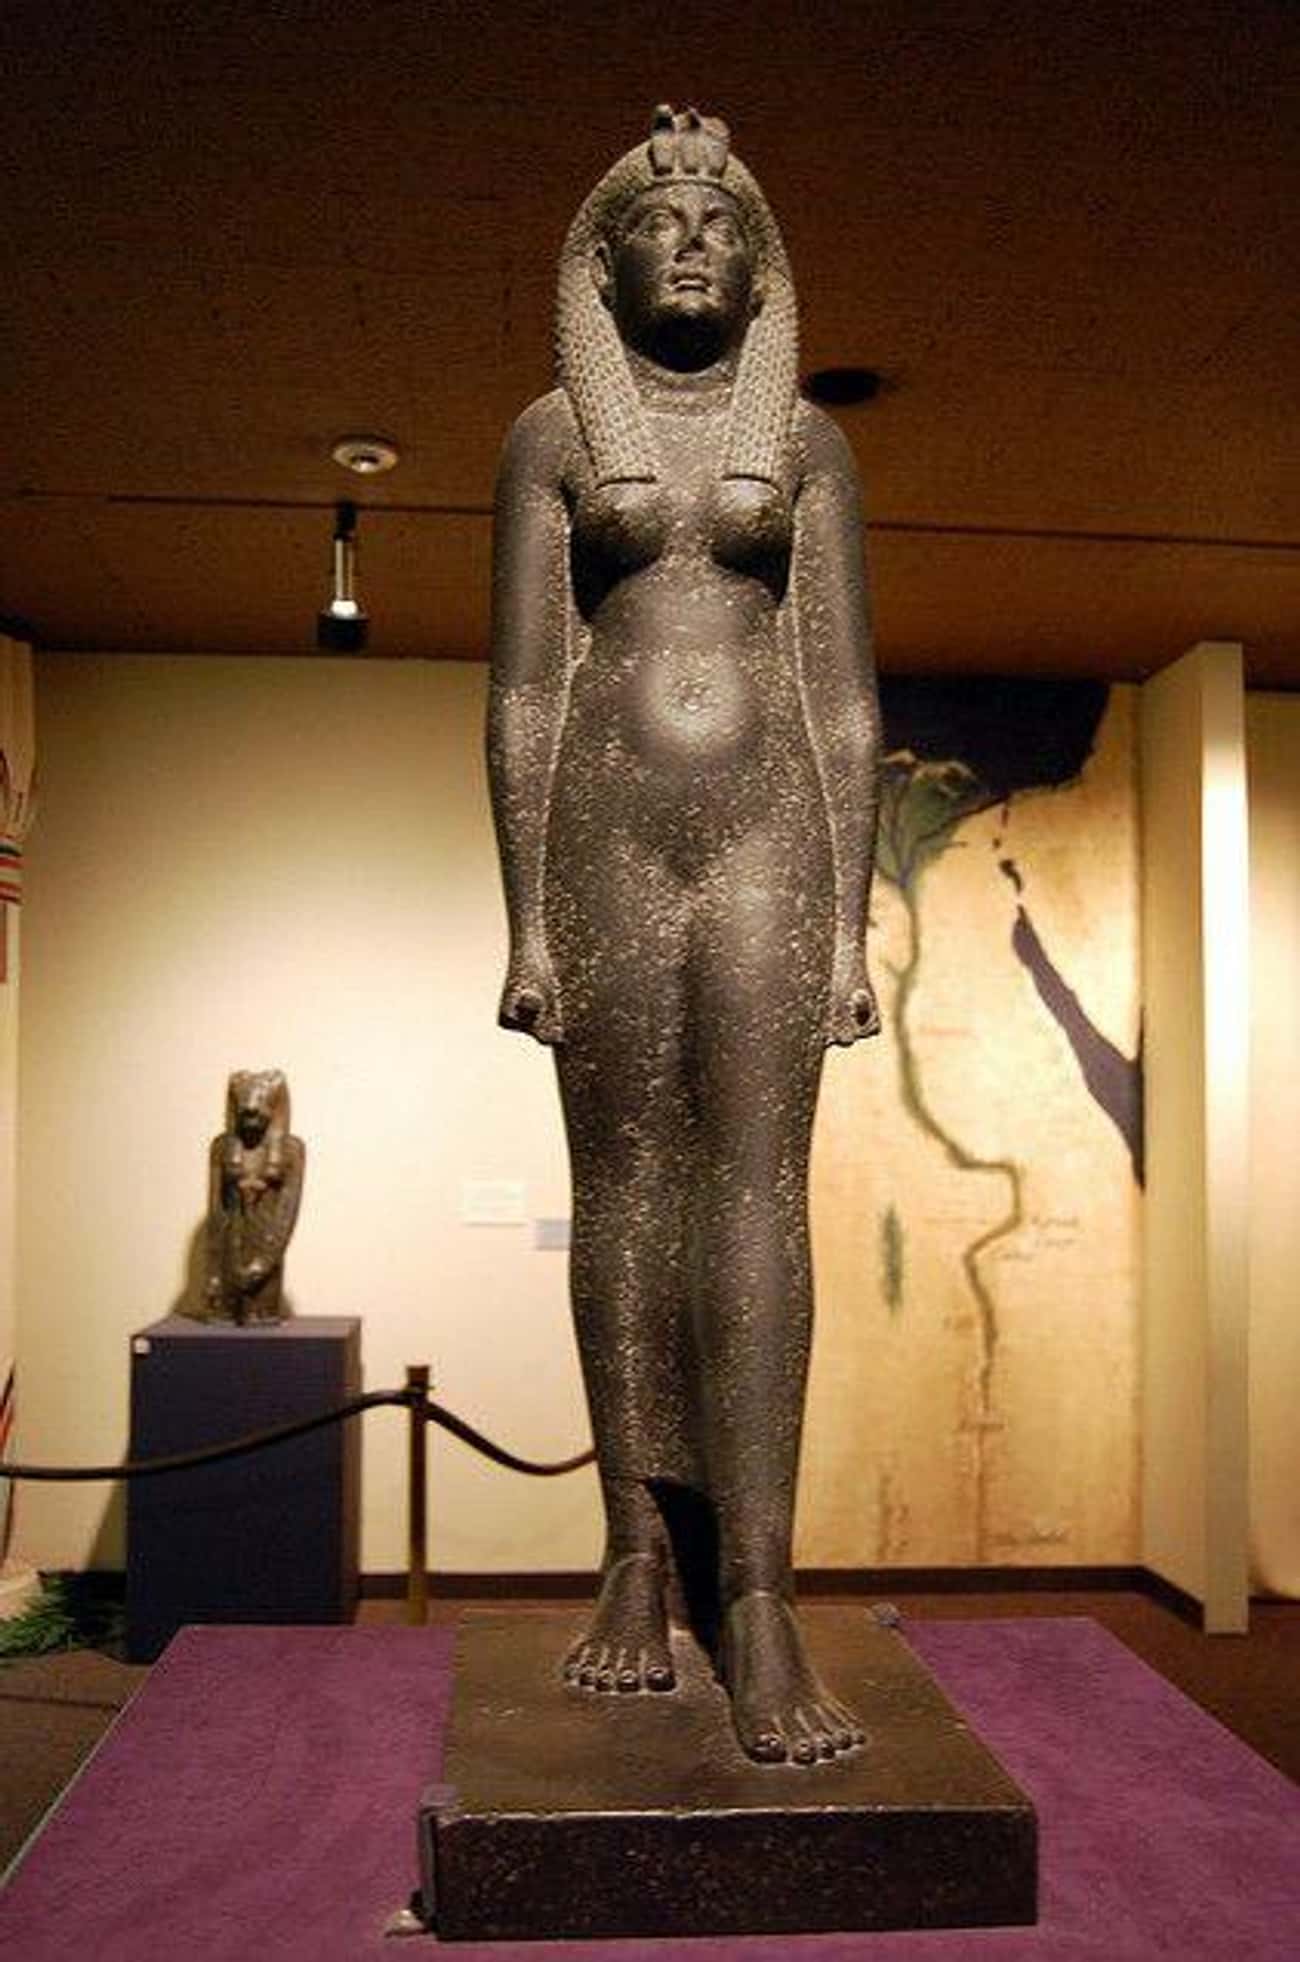 She Found Her ‘Home’ In An Egyptian Exhibit